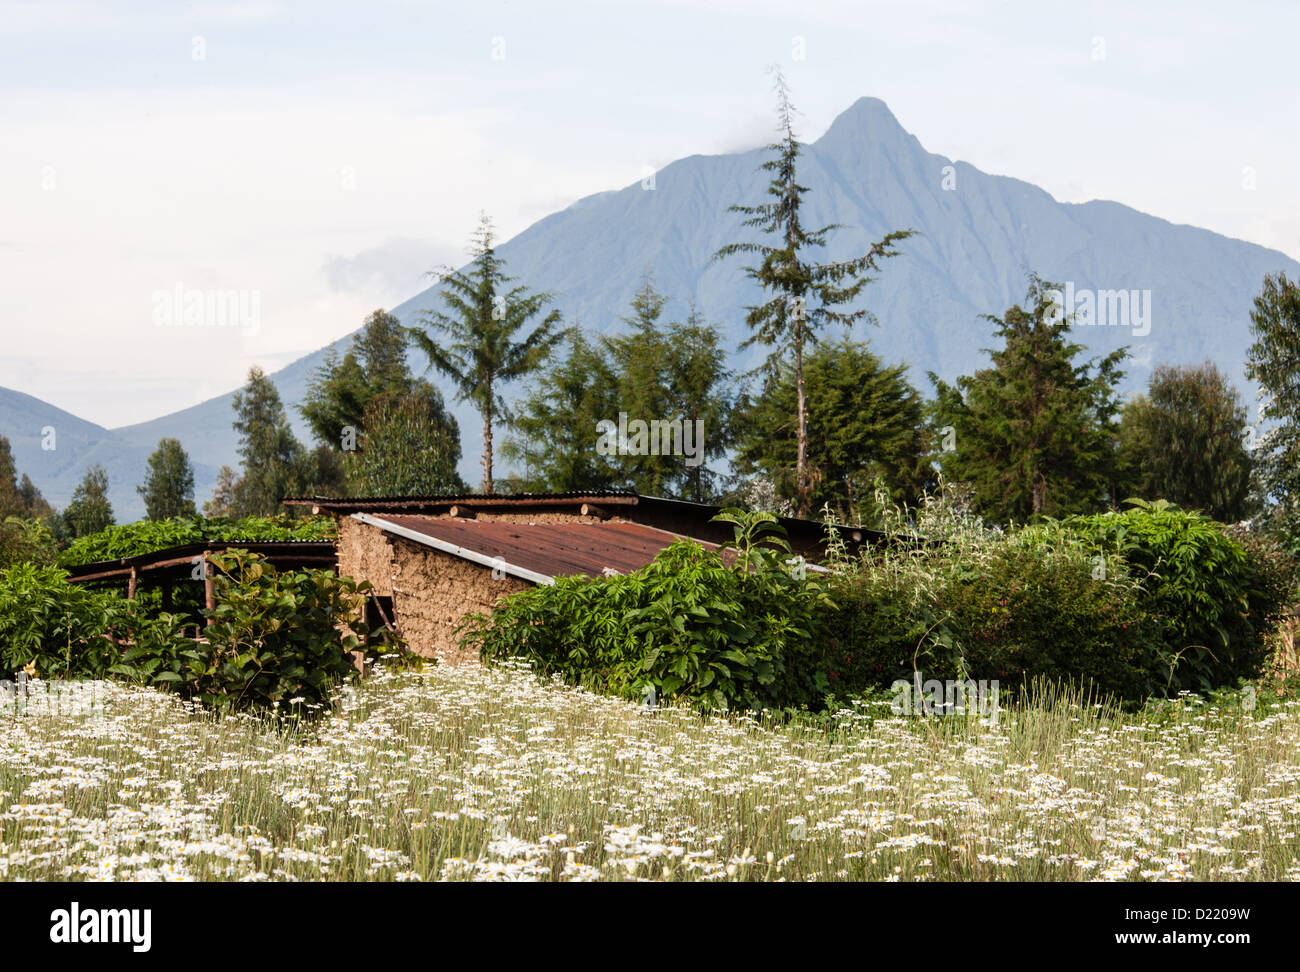 Pyrethrum (Chrysanthemum sp.), Dried flower heads used to make insecticide. One of the Rwandan volcanoes in the background. Stock Photo